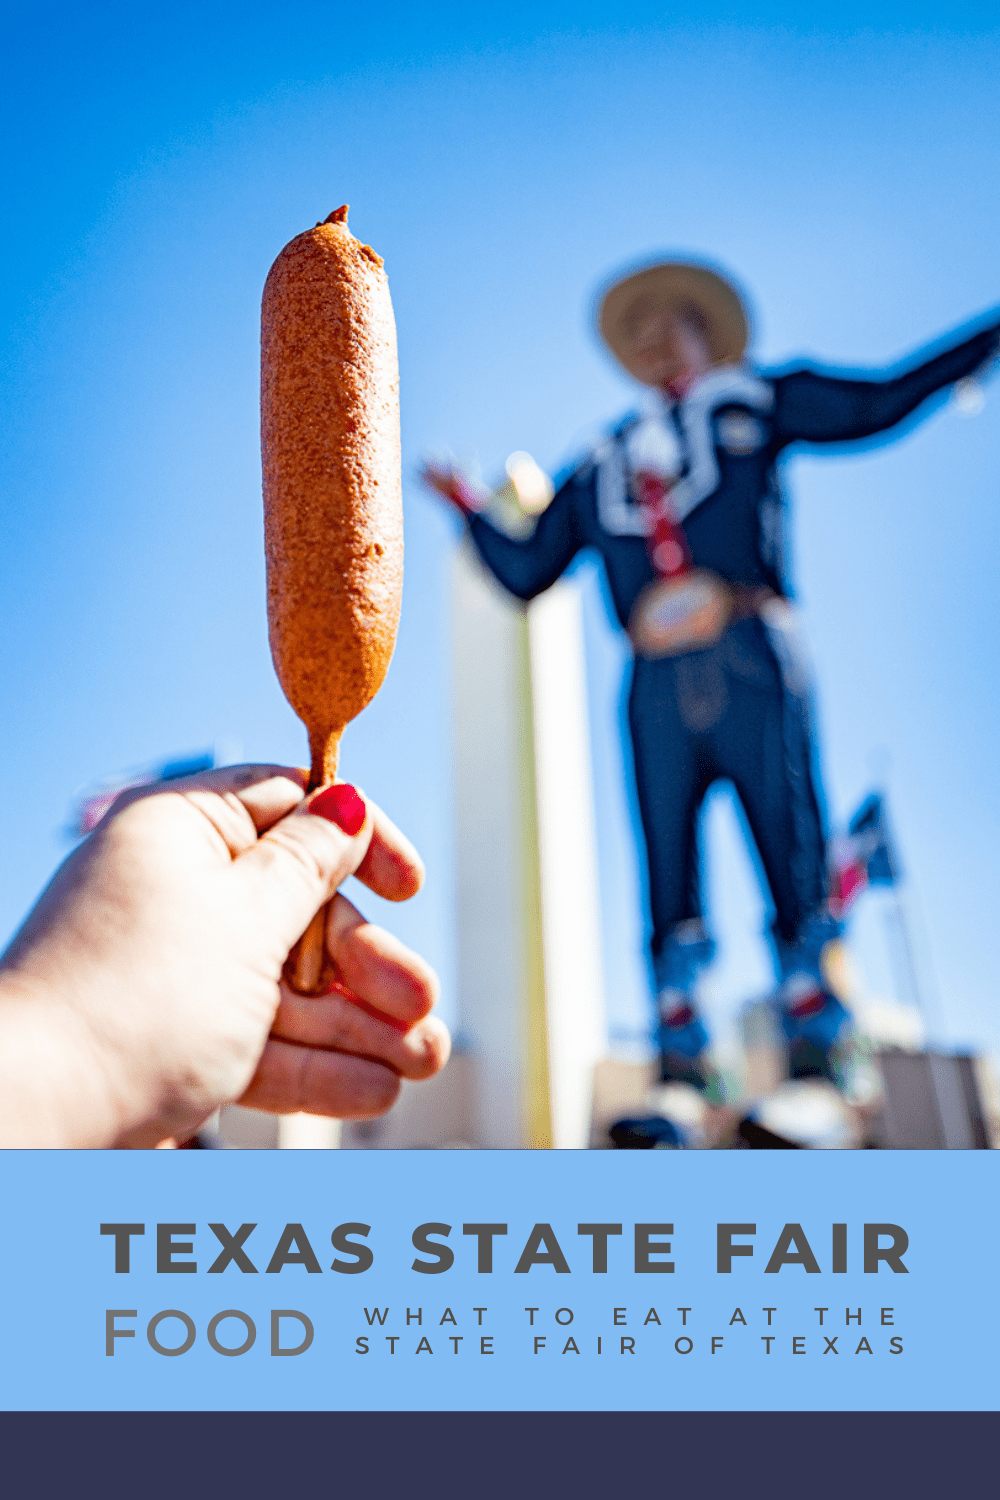 There's live music. There's livestock. There's the one and only Big Tex. But what really draws in millions of visitors to the State Fair of Texas each year is the food. The glorious, over-the-top, indulgent, deep-fried, Texas State Fair food. There is a lot of food: award winners from this year and from many years past. There are fair favorites, like corny dogs, deep fried Oreos, and turkey legs. There is just row after road of Texas State Fair food. #StateFairOfTexas #TexasStateFair